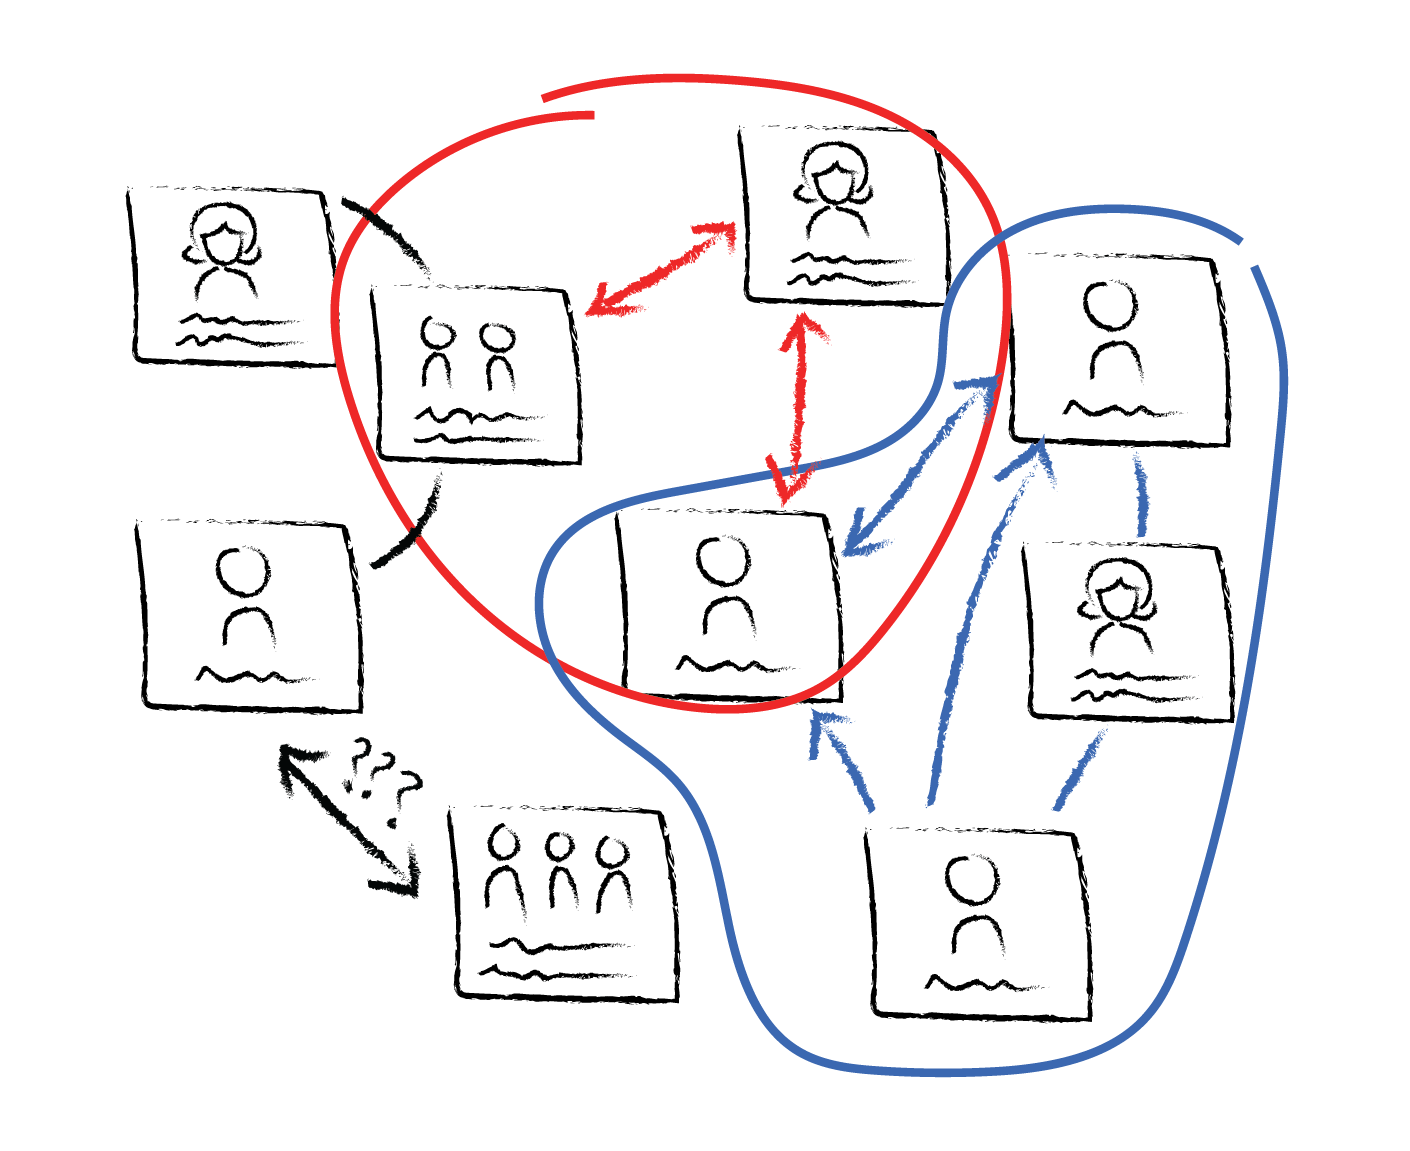 Sketch of Stakeholder connections between sticky notes